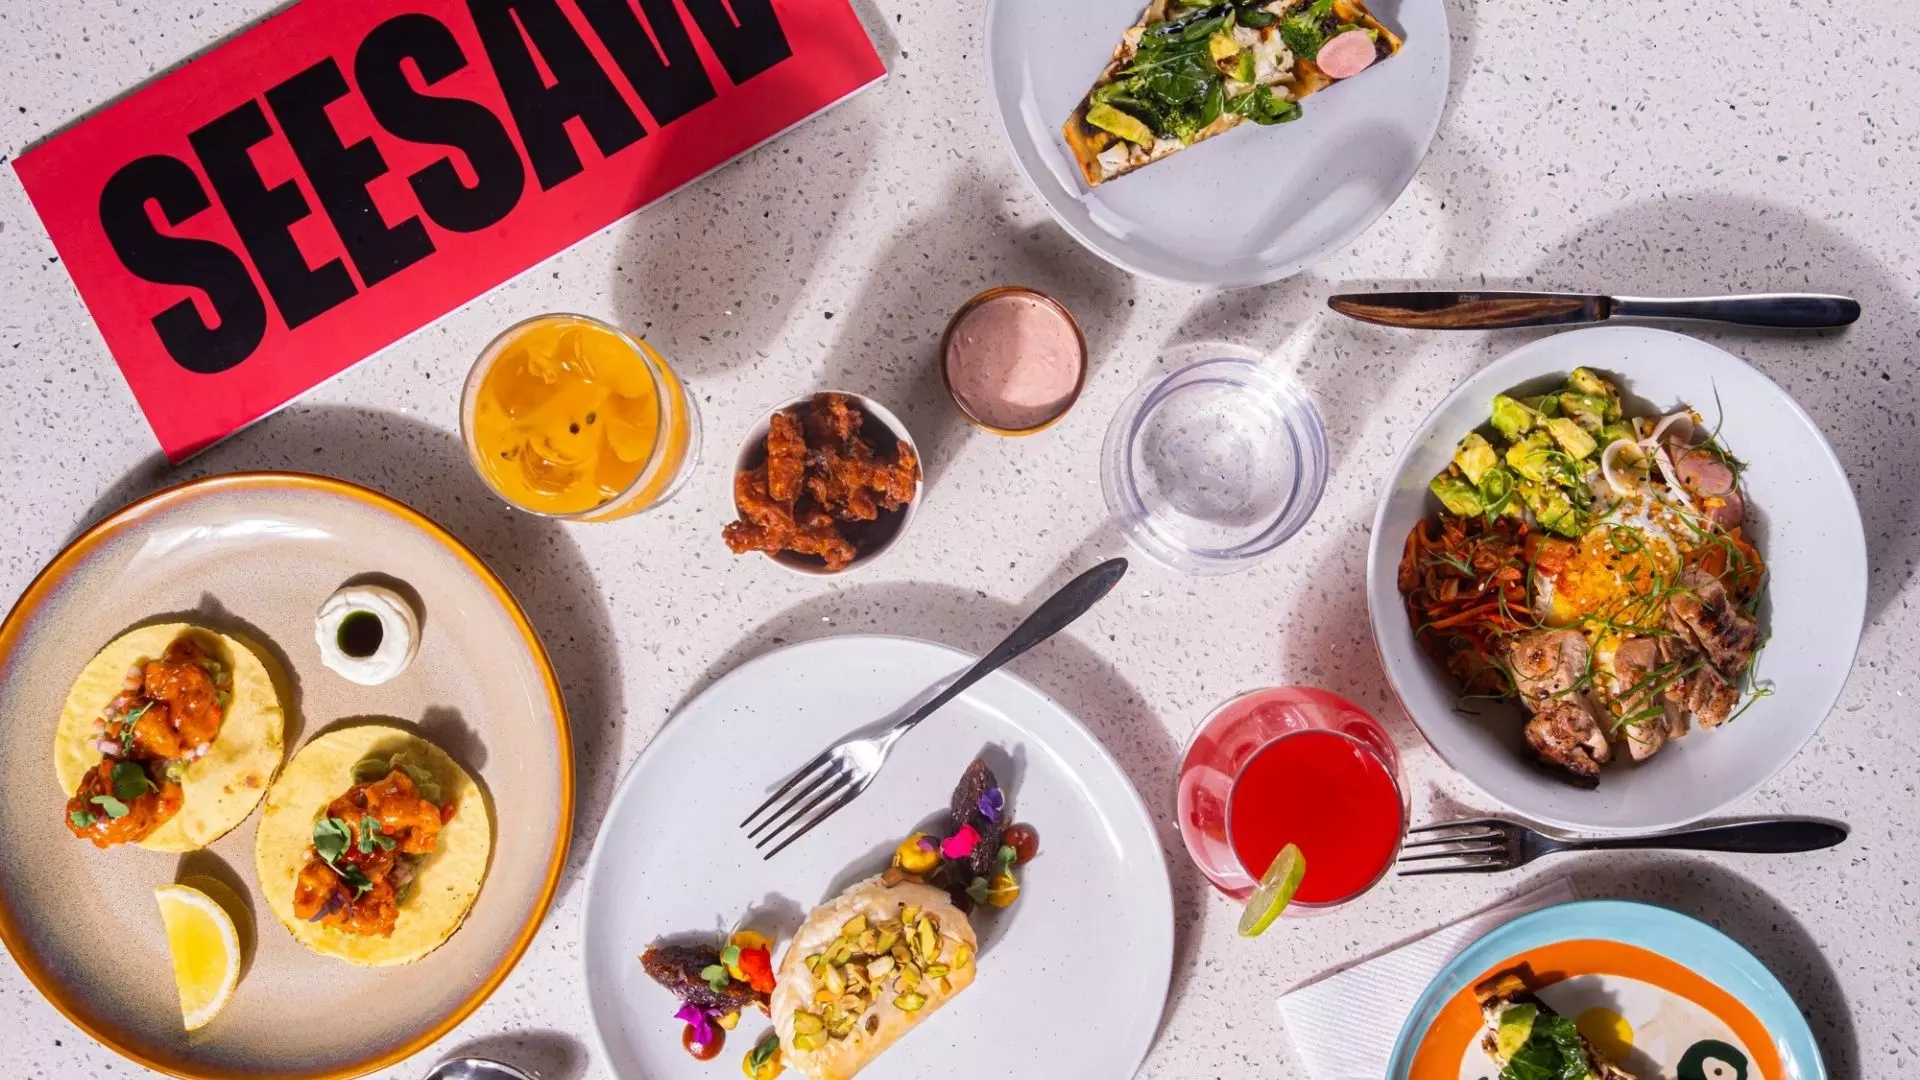 Seesawing through the highs and lows of BKCs brand new all-day cafe menu